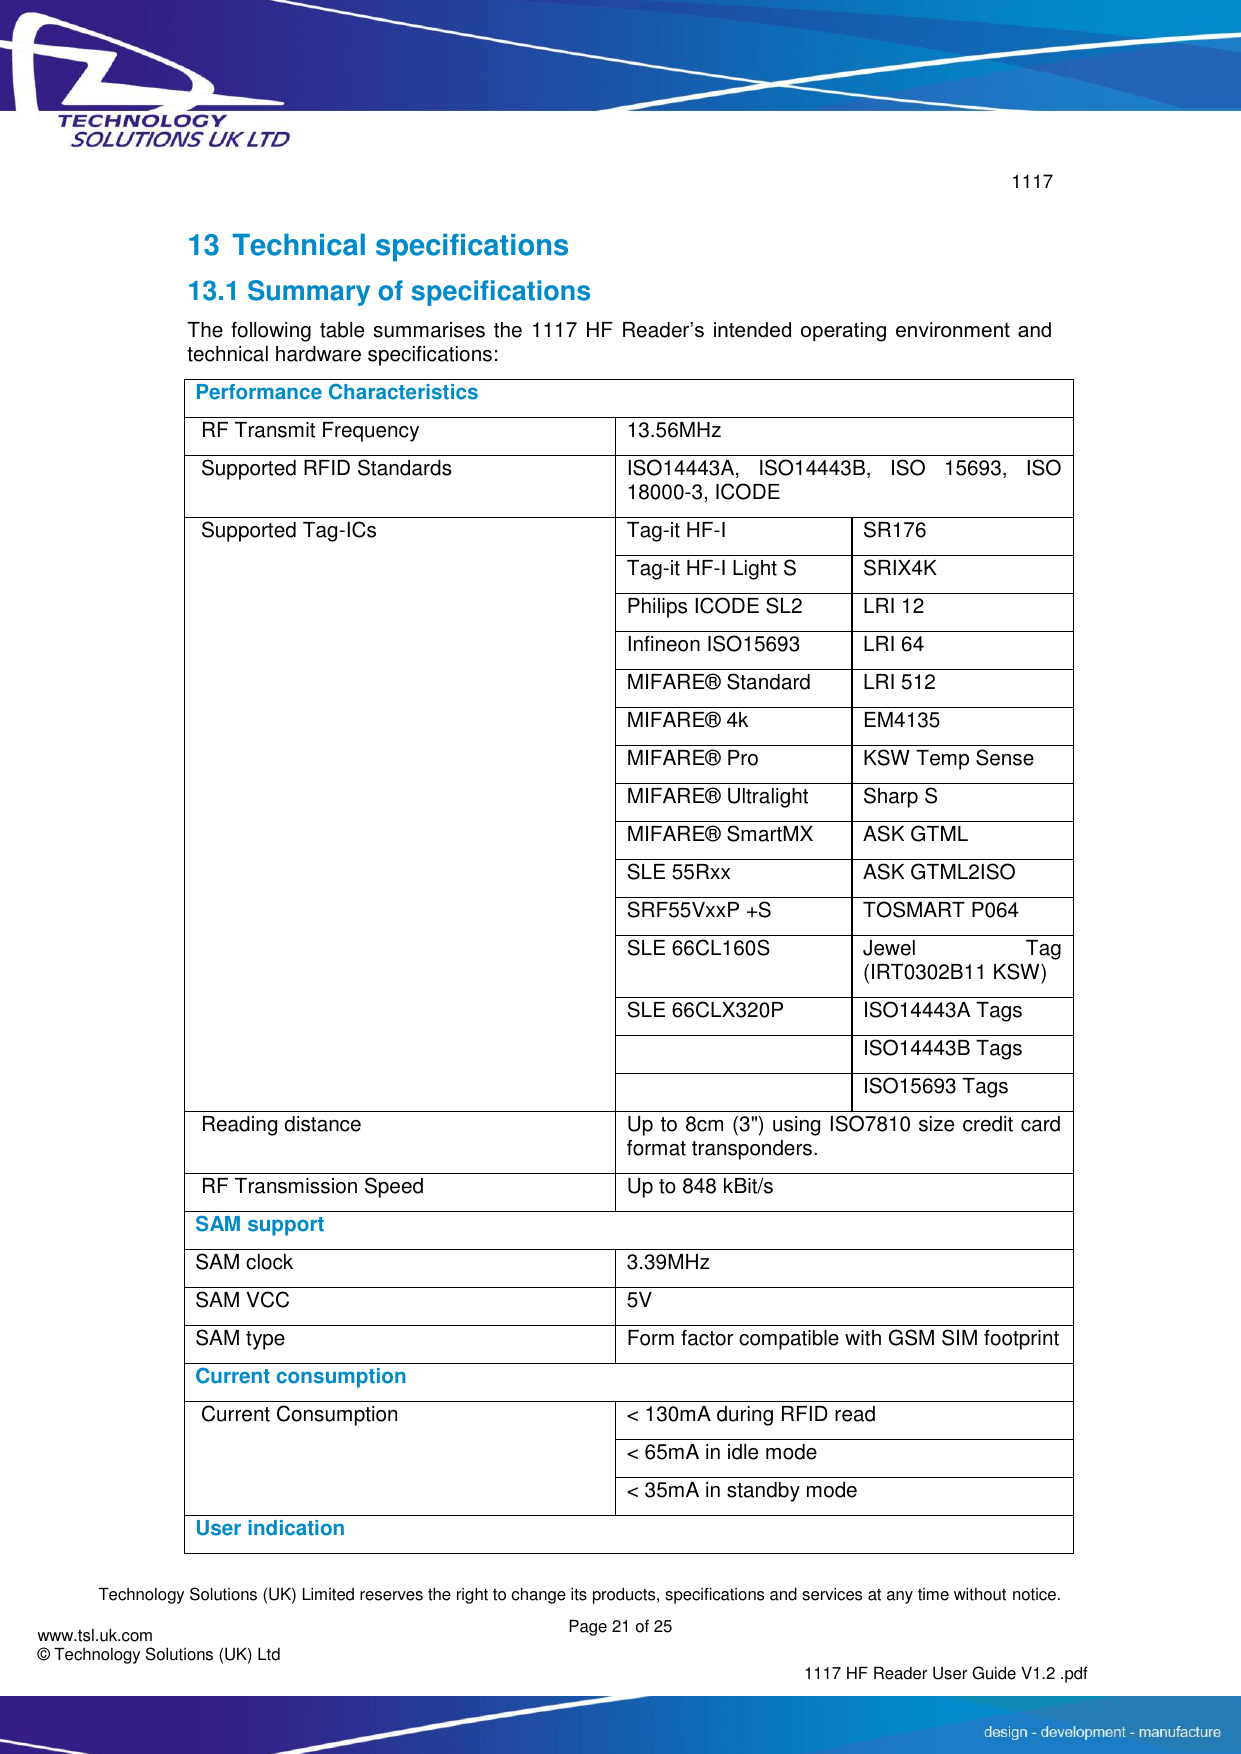        1117  Technology Solutions (UK) Limited reserves the right to change its products, specifications and services at any time without notice. Page 21 of 25 1117 HF Reader User Guide V1.2 .pdf www.tsl.uk.com © Technology Solutions (UK) Ltd   13 Technical specifications 13.1 Summary of specifications The following table summarises the 1117 HF Reader’s  intended operating  environment and technical hardware specifications: Performance Characteristics  RF Transmit Frequency   13.56MHz    Supported RFID Standards   ISO14443A,  ISO14443B,  ISO  15693,  ISO 18000-3, ICODE  Supported Tag-ICs         Tag-it HF-I SR176   Tag-it HF-I Light S SRIX4K   Philips ICODE SL2 LRI 12 Infineon ISO15693 LRI 64 MIFARE® Standard LRI 512 MIFARE® 4k   EM4135 MIFARE® Pro   KSW Temp Sense MIFARE® Ultralight   Sharp S MIFARE® SmartMX   ASK GTML SLE 55Rxx   ASK GTML2ISO SRF55VxxP +S TOSMART P064 SLE 66CL160S   Jewel  Tag (IRT0302B11 KSW) SLE 66CLX320P   ISO14443A Tags    ISO14443B Tags    ISO15693 Tags  Reading distance   Up to 8cm (3&quot;) using ISO7810 size credit card format transponders.  RF Transmission Speed   Up to 848 kBit/s   SAM support SAM clock 3.39MHz SAM VCC 5V SAM type Form factor compatible with GSM SIM footprint Current consumption  Current Consumption     &lt; 130mA during RFID read &lt; 65mA in idle mode &lt; 35mA in standby mode User indication 